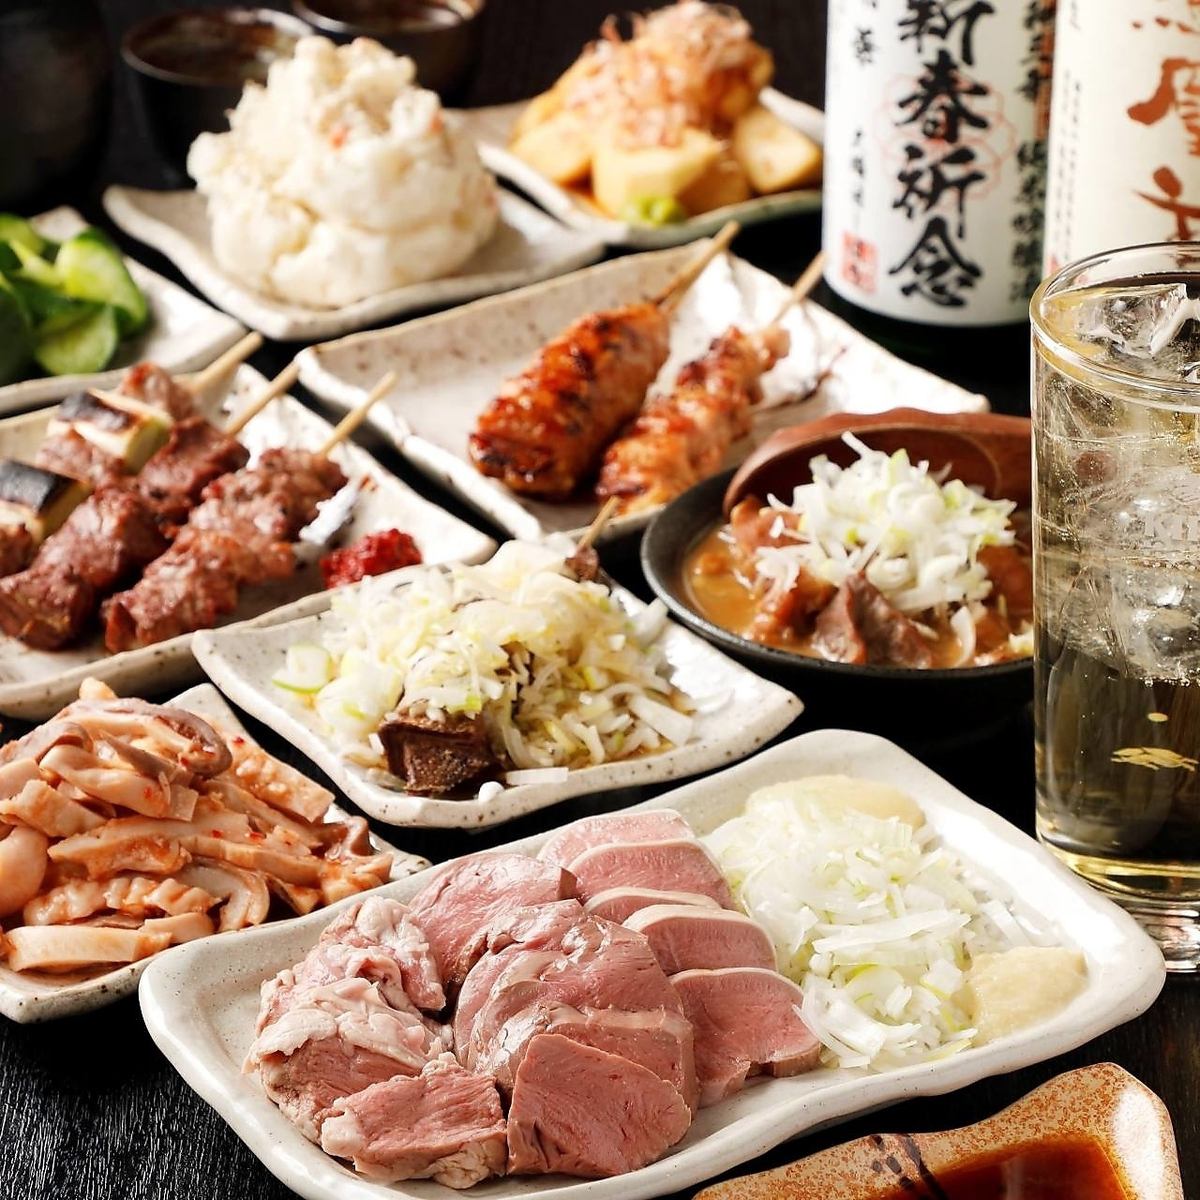 We offer 3 types of banquet courses where you can enjoy our signature motsuyaki and skewers★